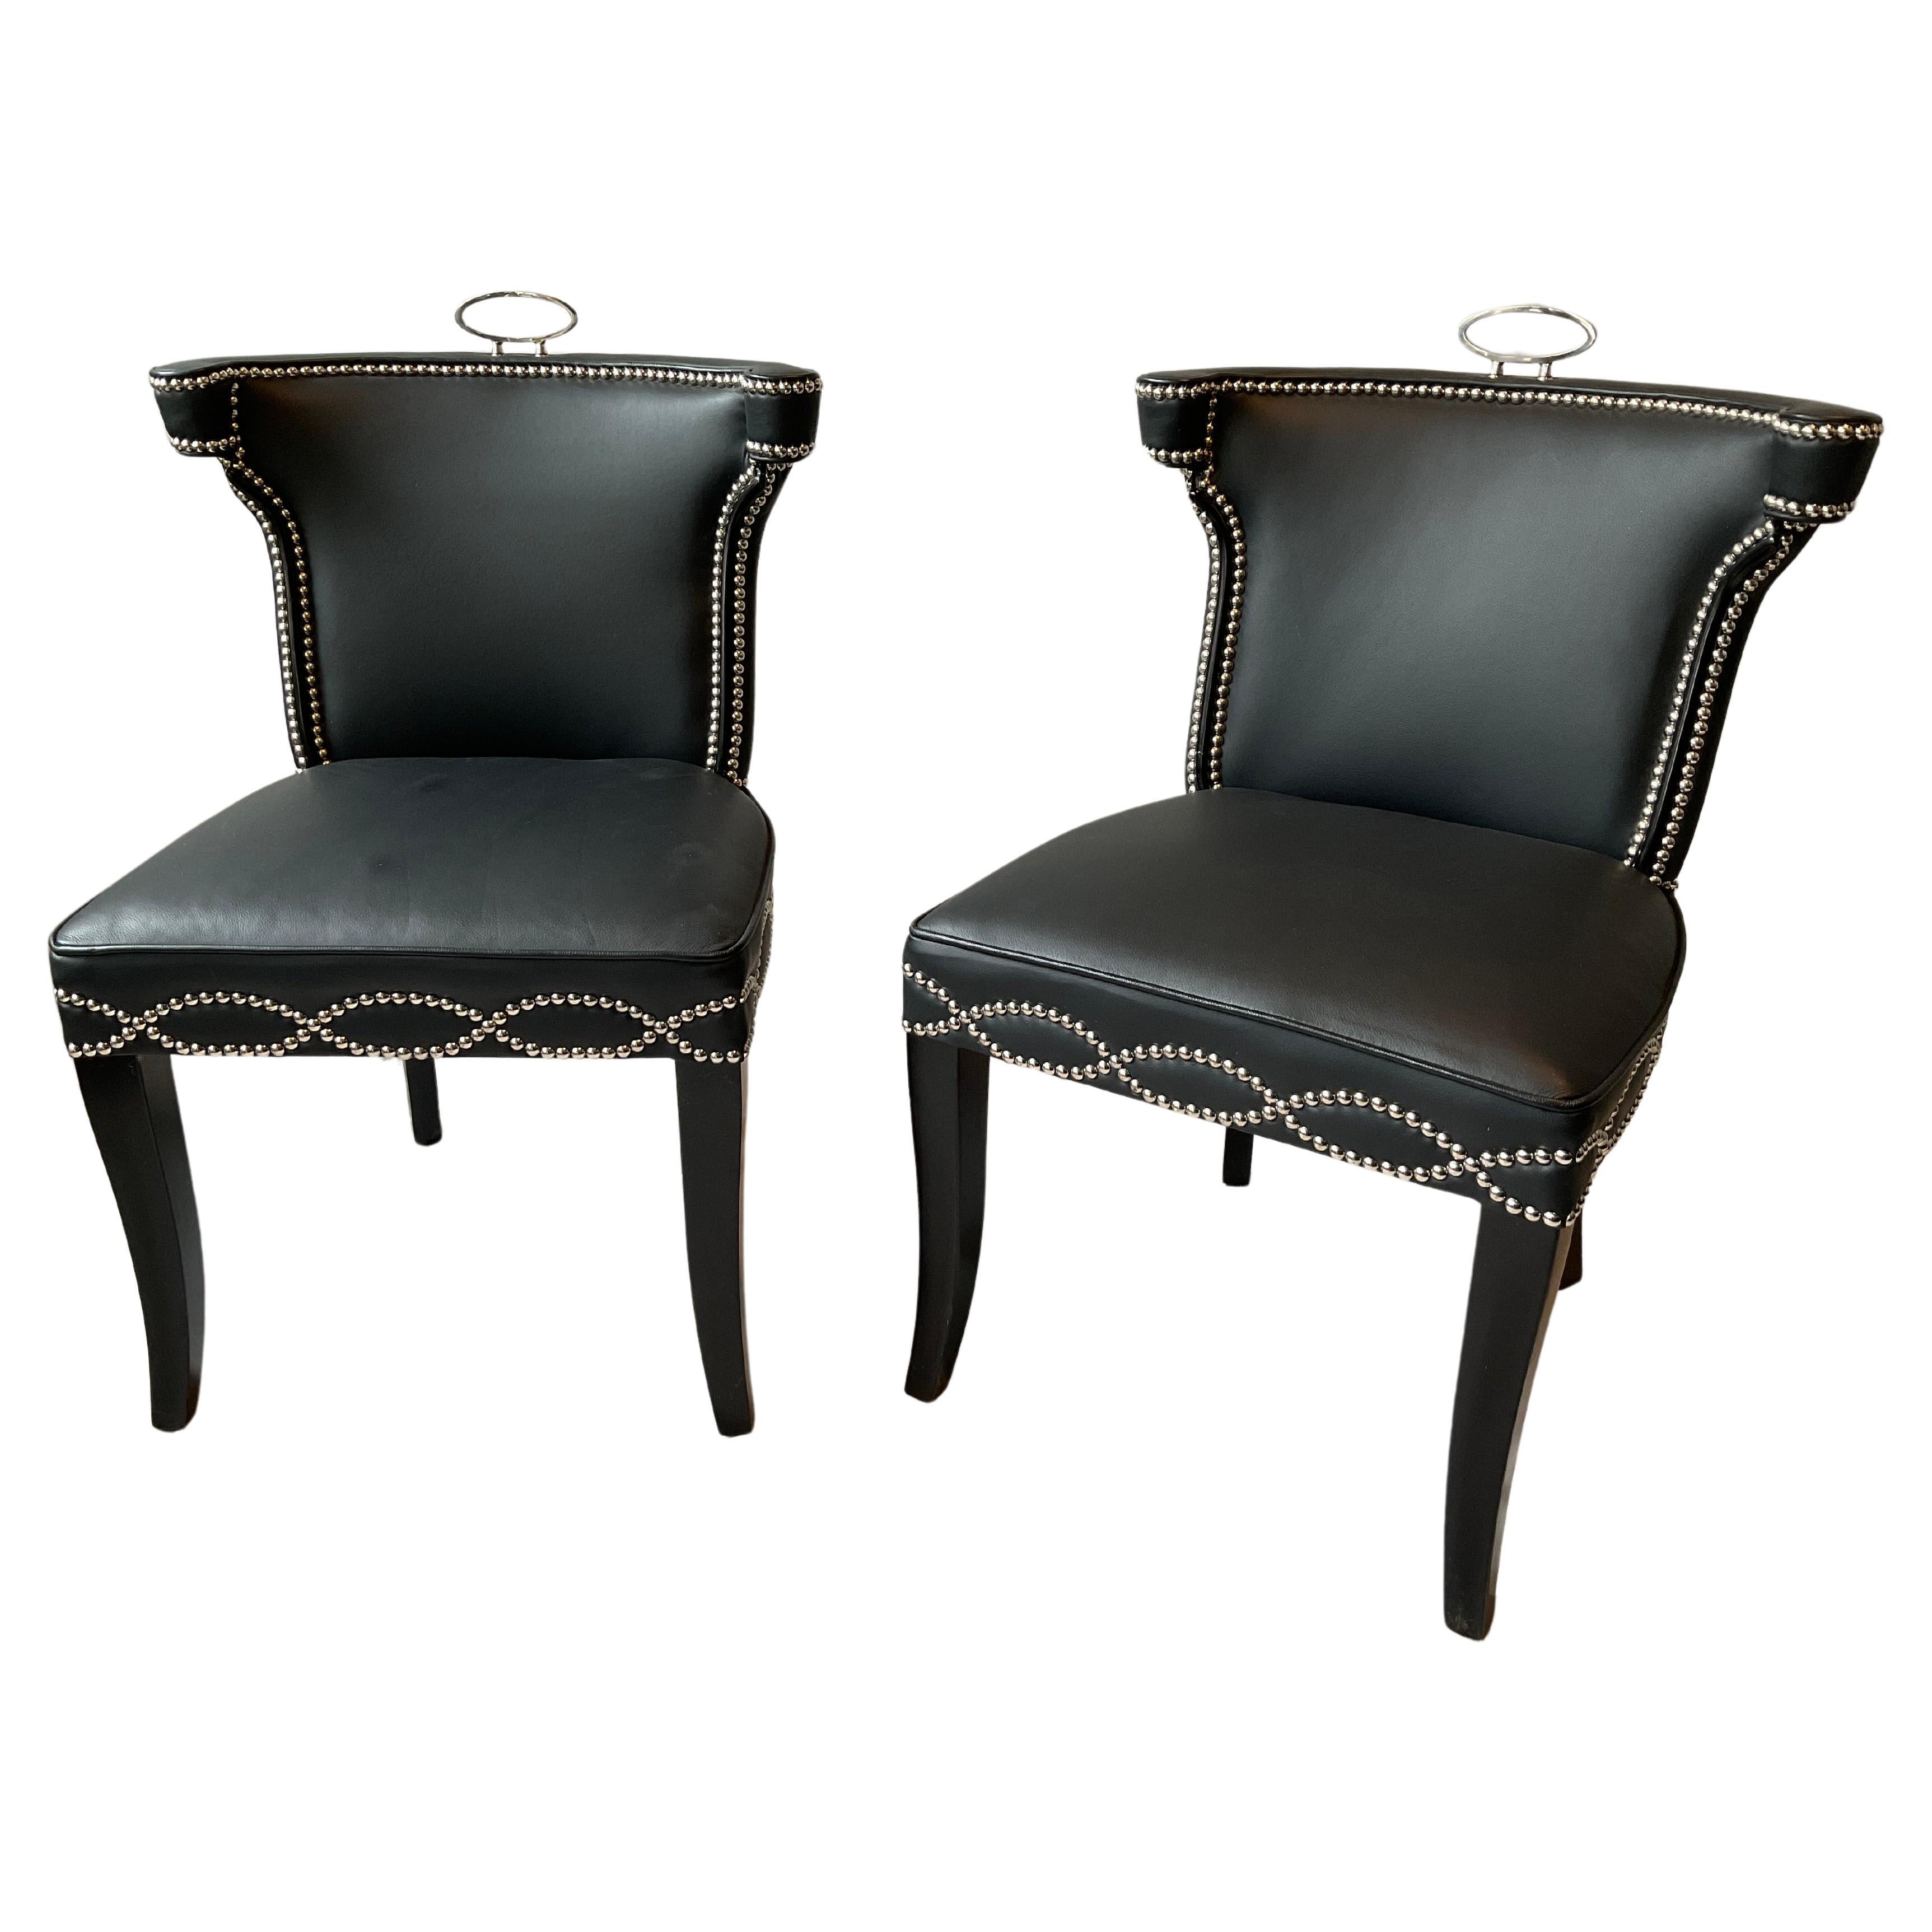 Pair Of Global Views Casino Black Leather Chairs For Sale